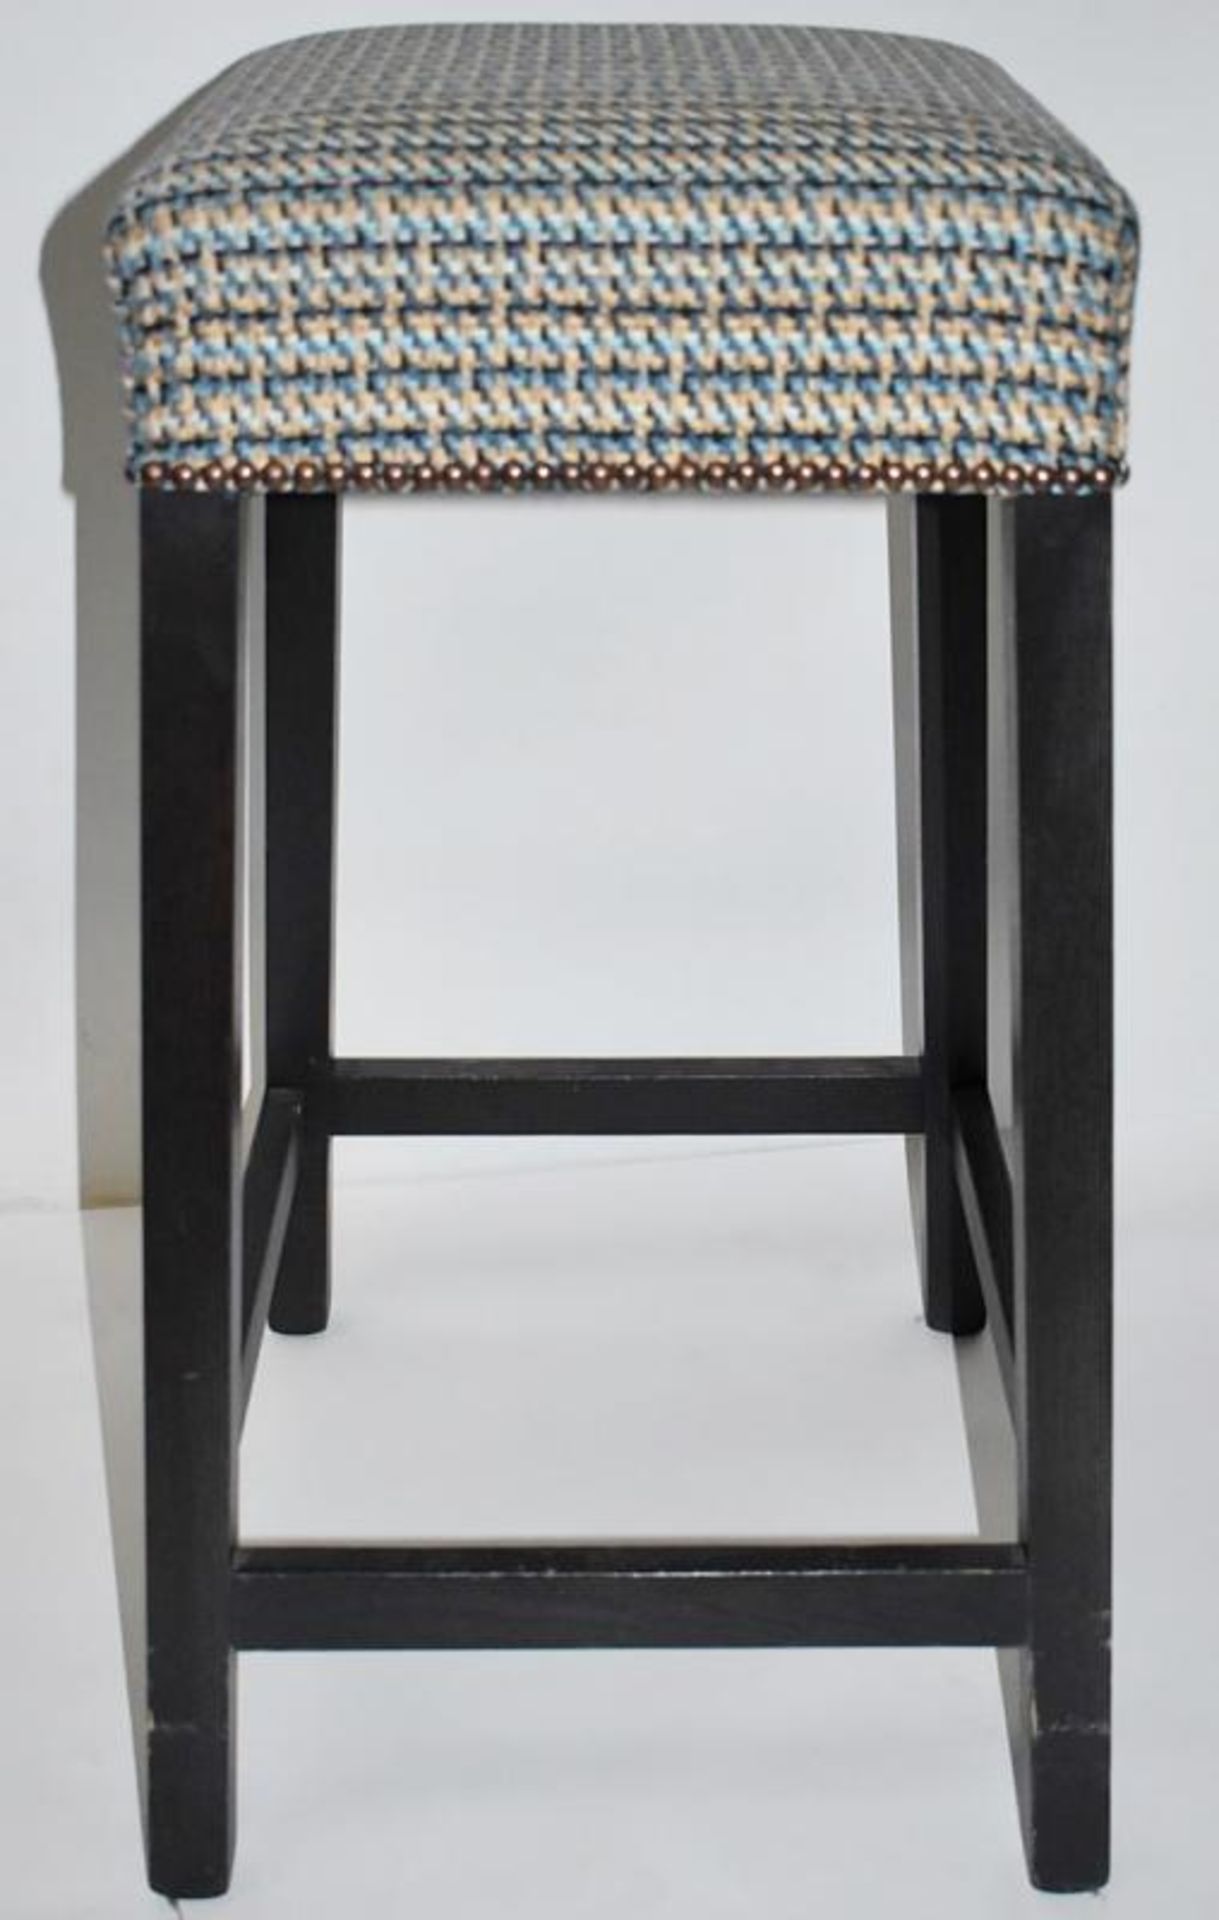 1 x Contemporary Bar Stool Upholstered In A Chic Designer Fabric - Recently Removed From A Famous De - Image 2 of 7